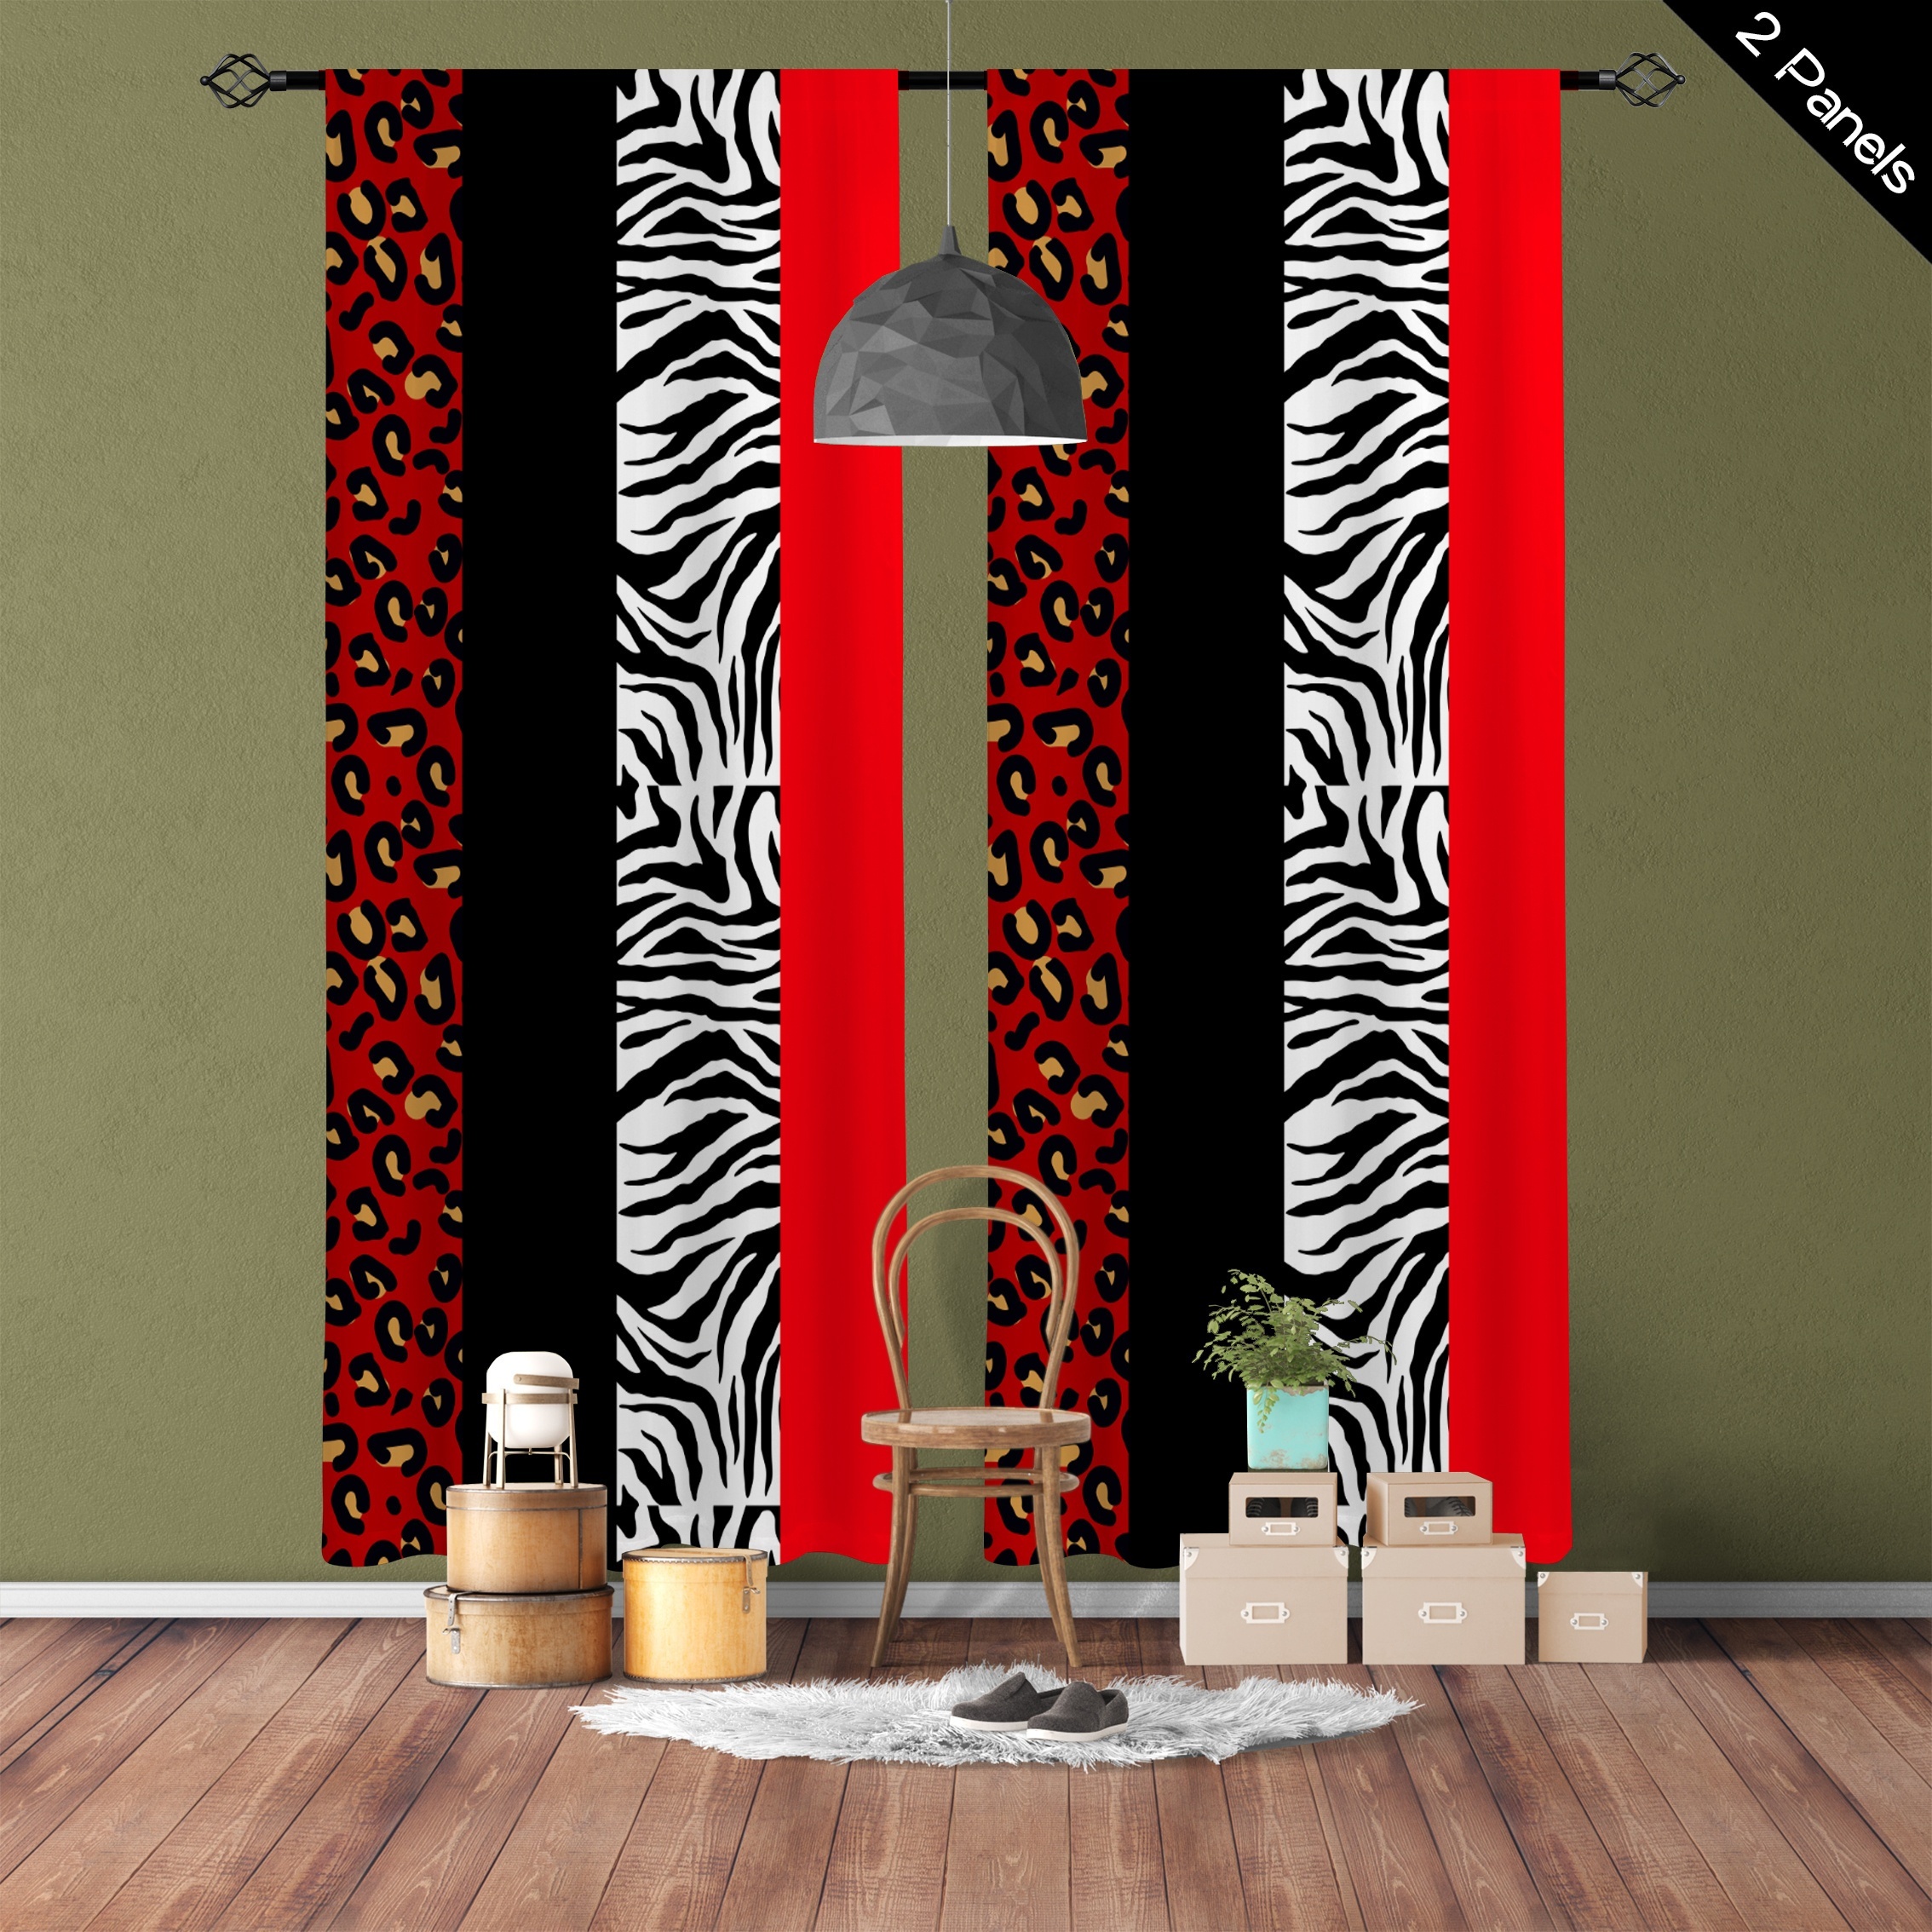 

2pcs, Red Vertical Strip Leopard Zebra Print Translucent Curtains, Multi-scene Polyester Rod Pocket Decorative Curtains For Living Room Playroom Bedroom Home Decor Party Supplies